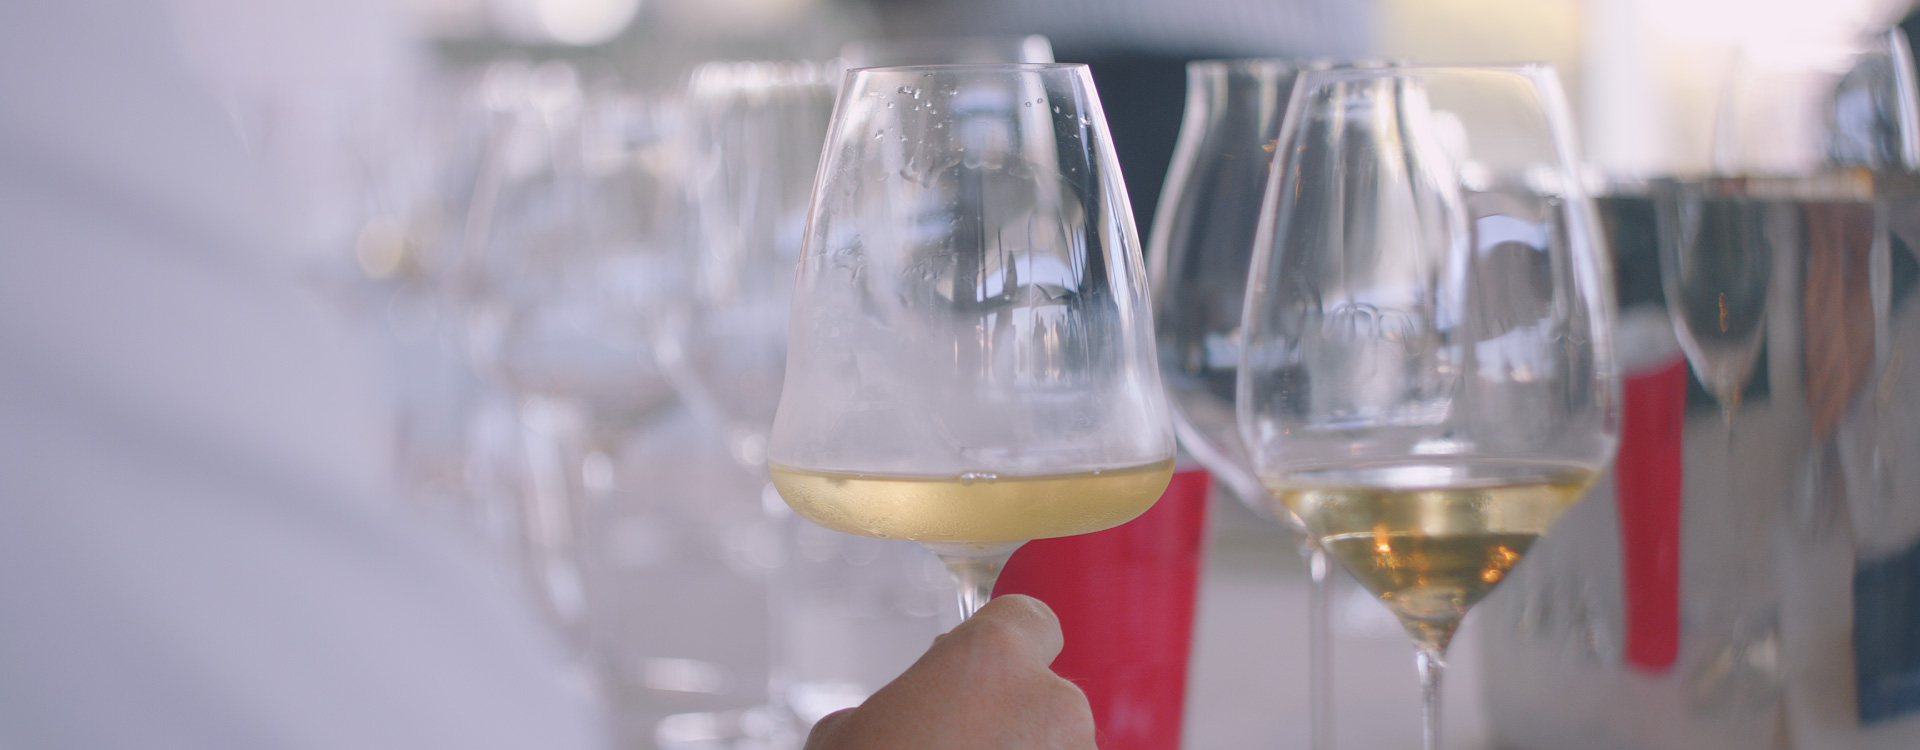 Angus Hughson takes us through our amazing day evaluating sparkling glassware with Maximilian Riedel.